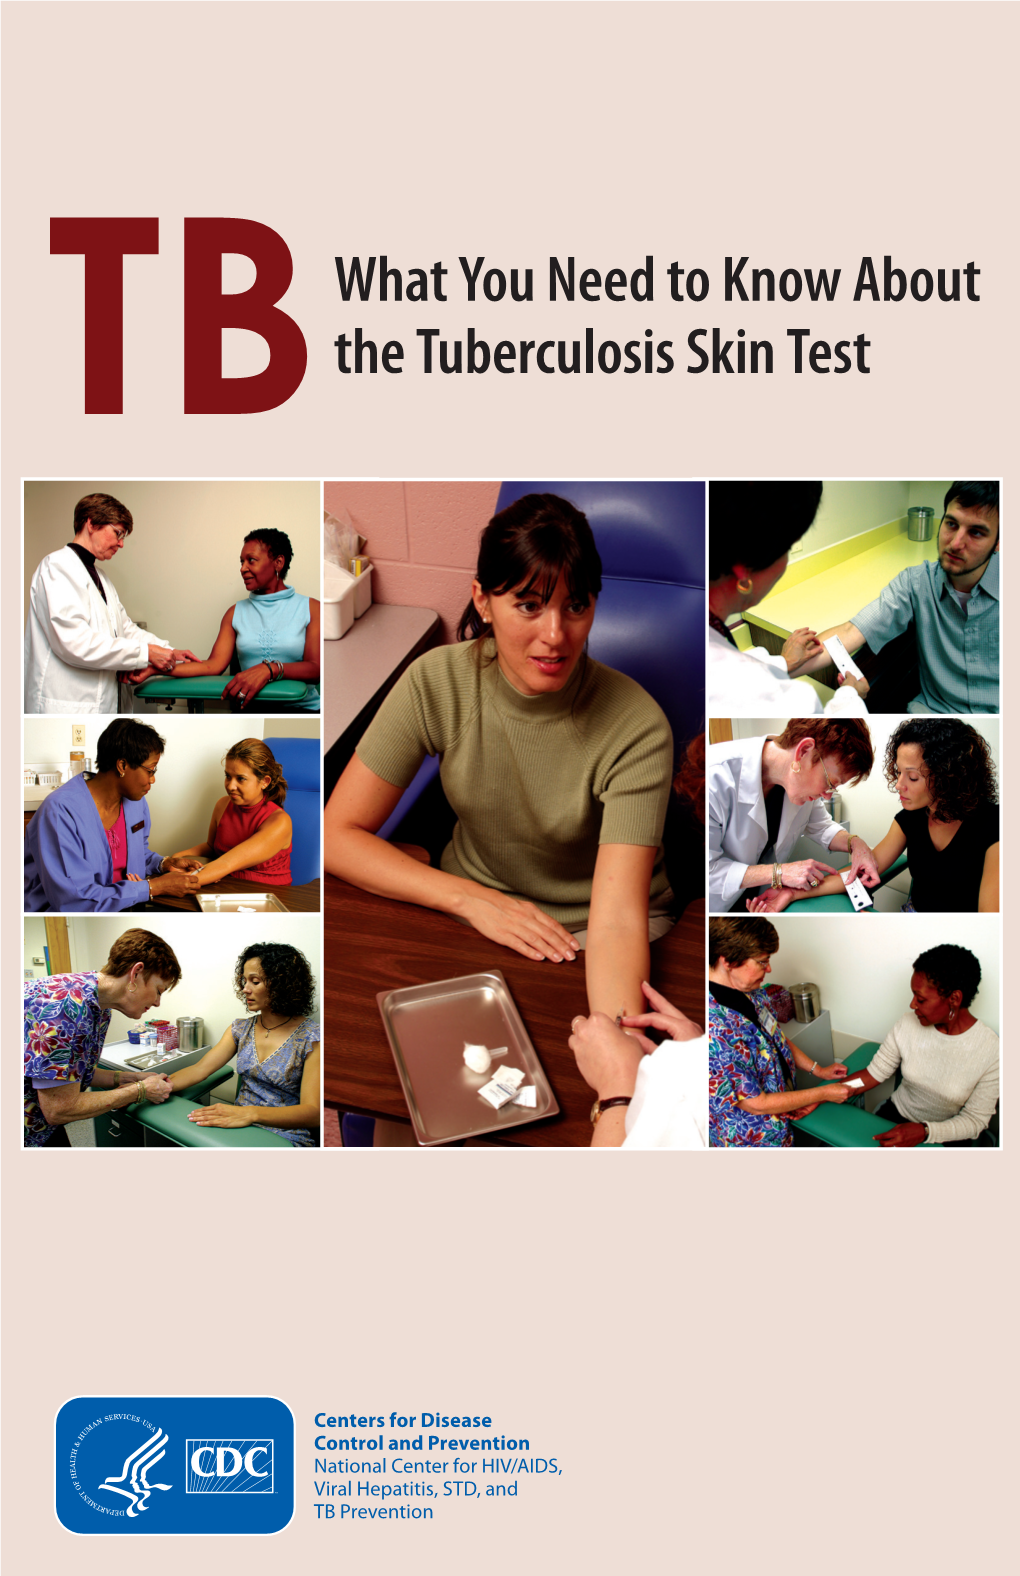 Tbwhat You Need to Know About the Tuberculosis Skin Test